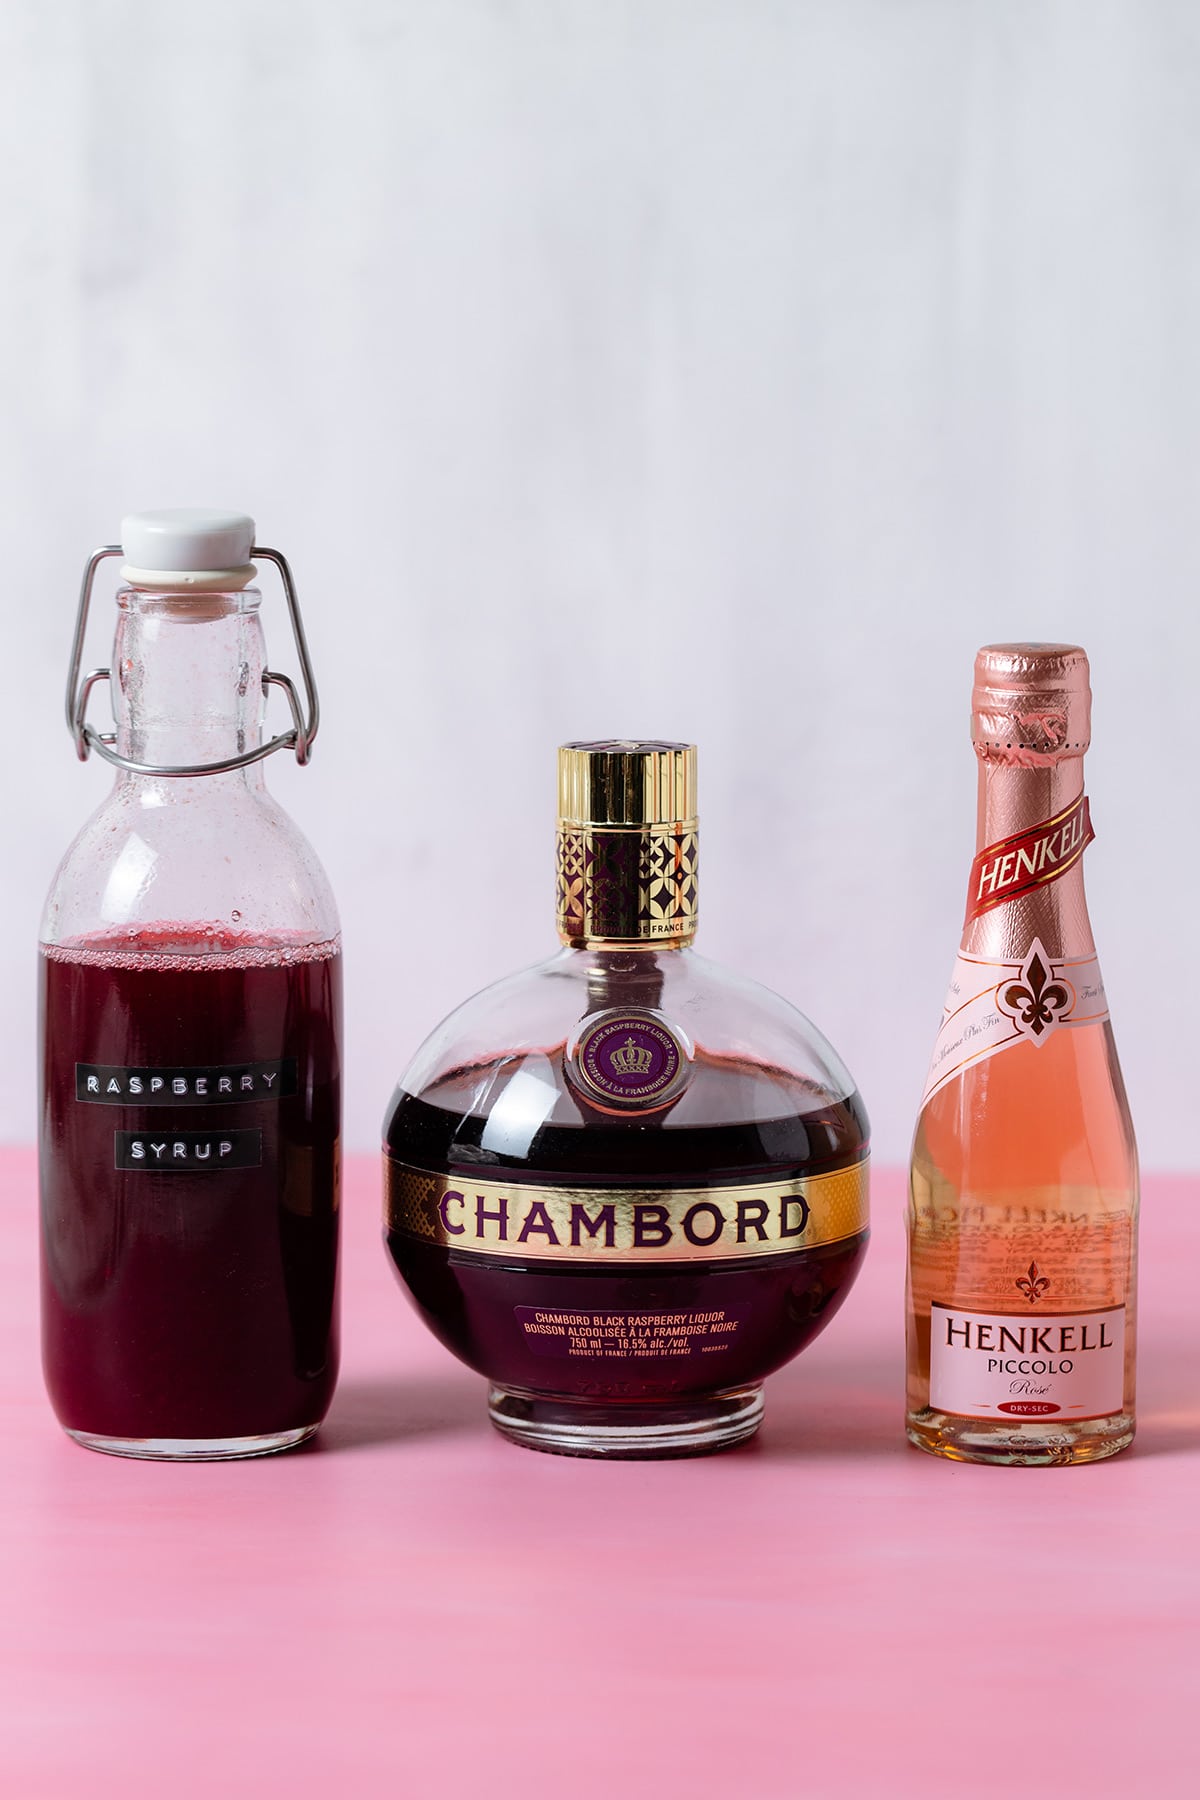 Raspberry syrup, Chambord, and Prosecco on pink and white background.